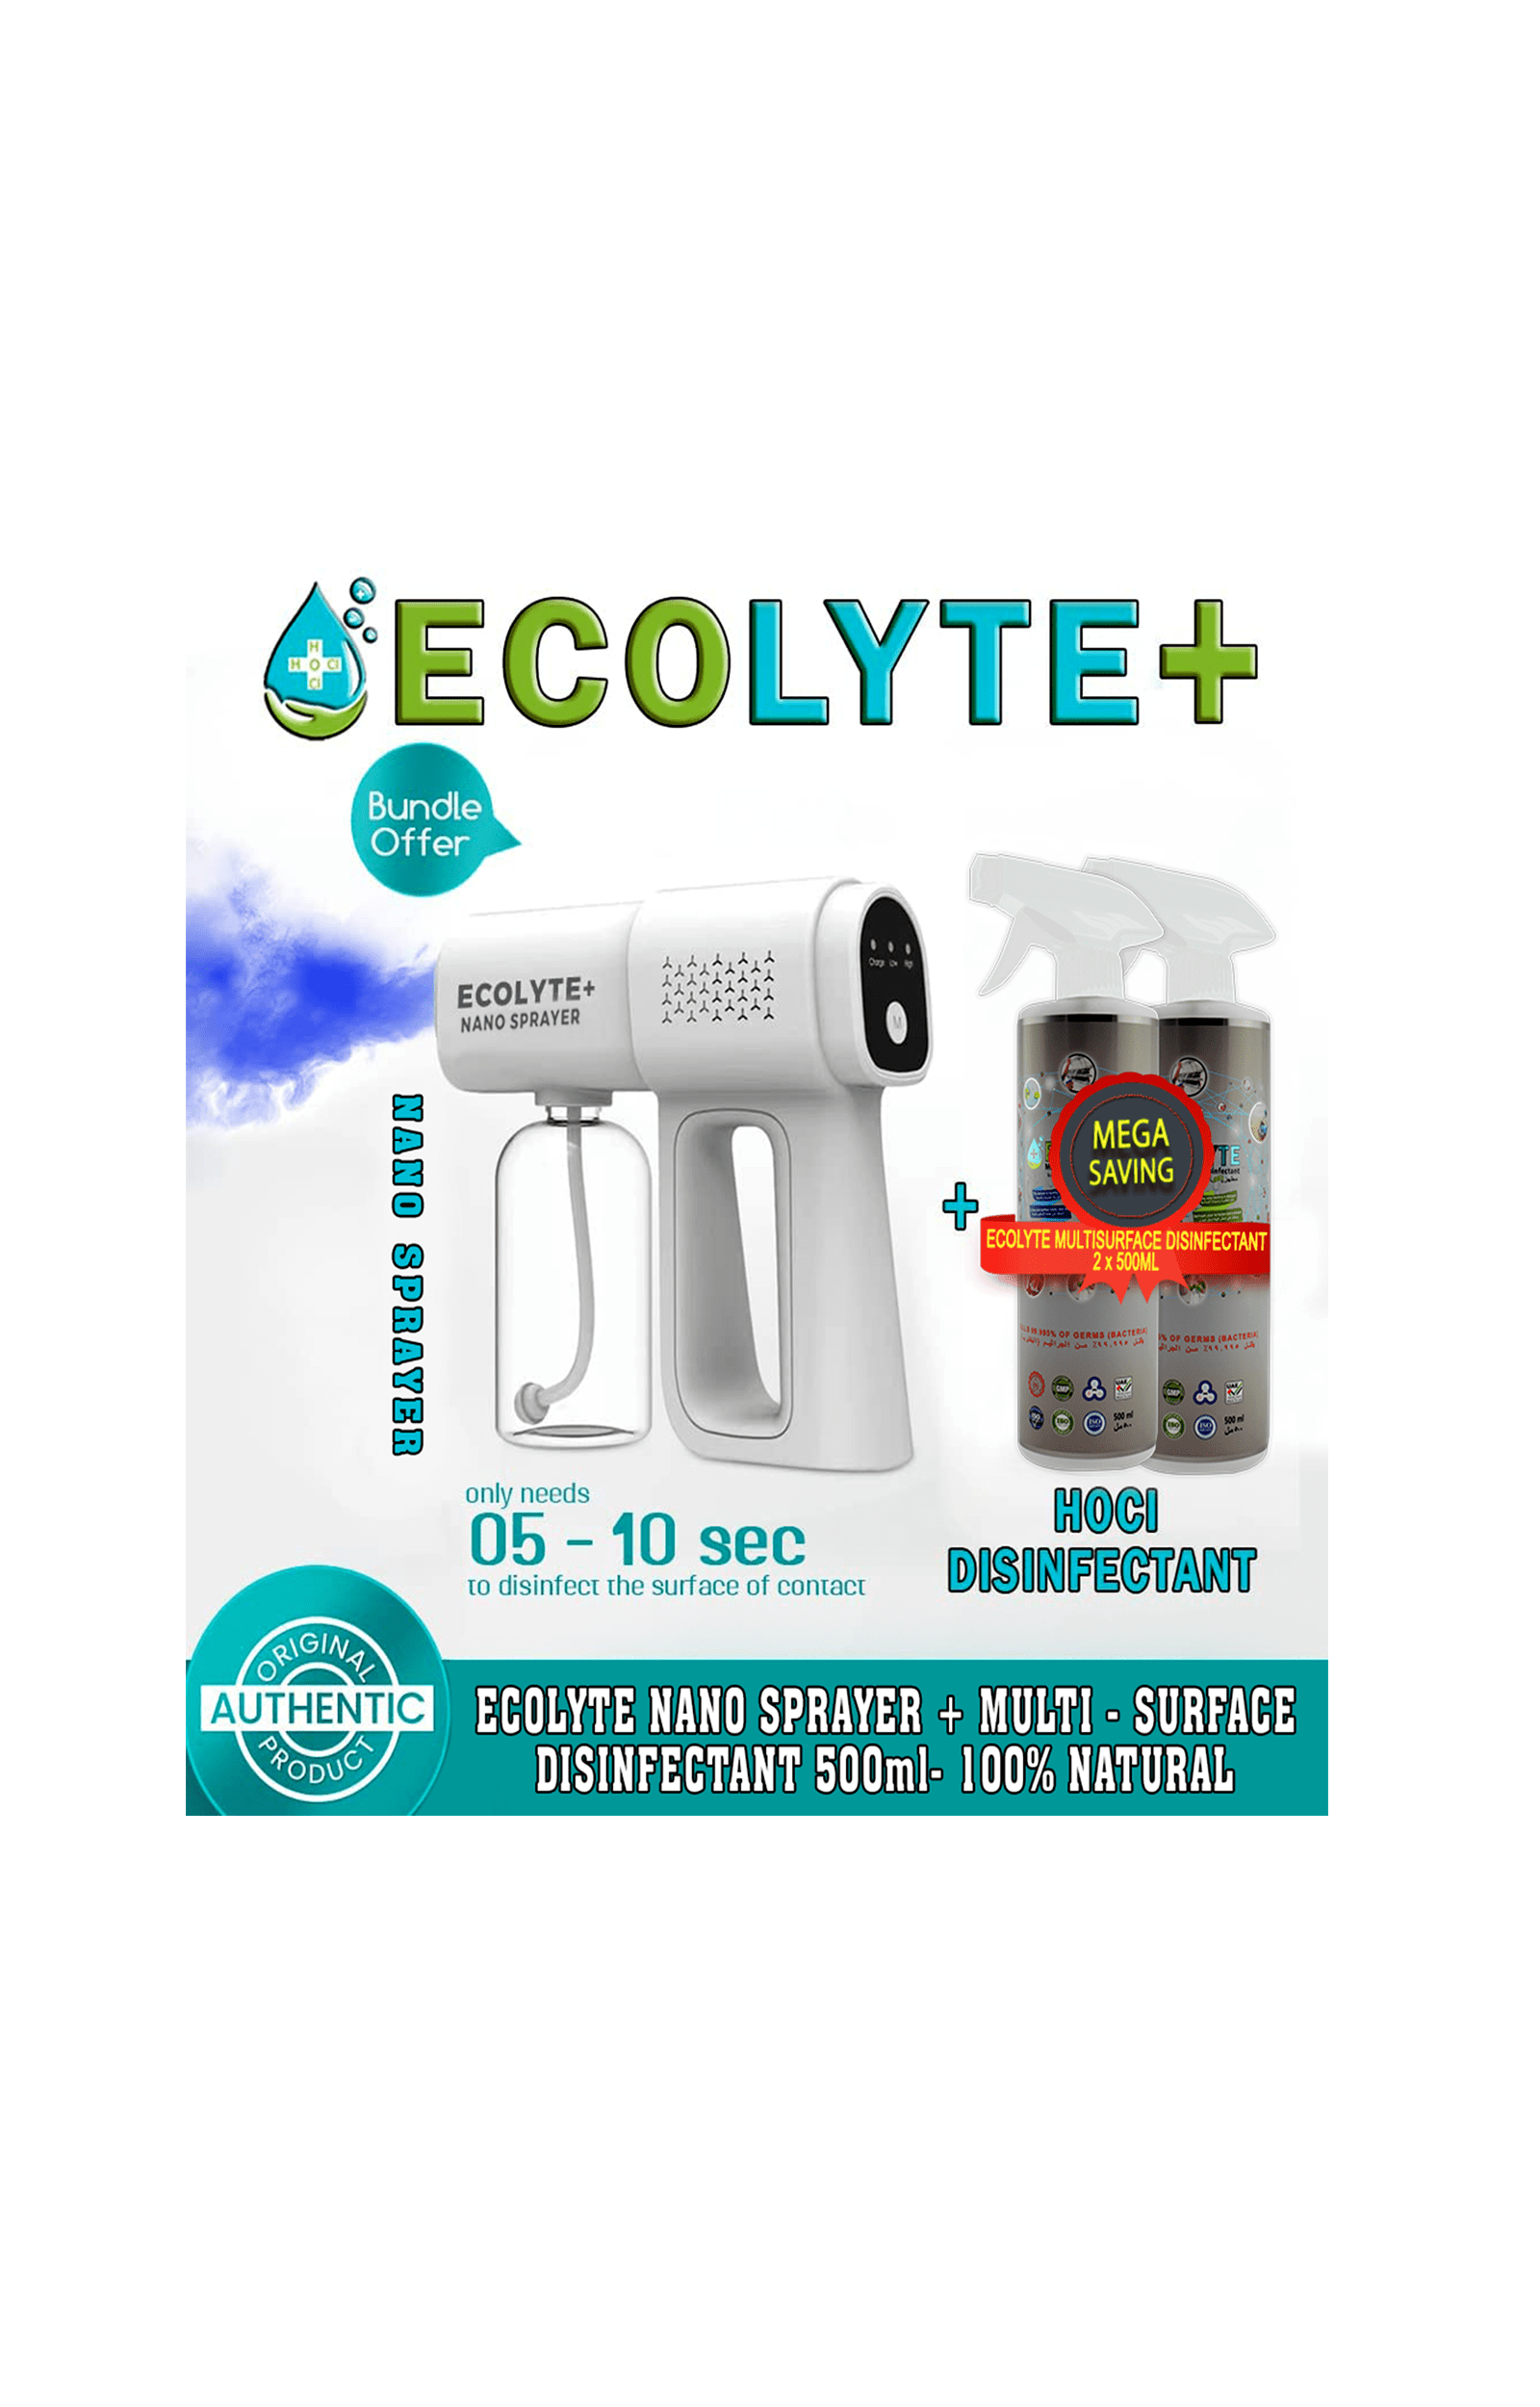 ECOLYTE Best Disinfectant Nano Sprayer with ECOLYTE Multi-Surface Disinfectant